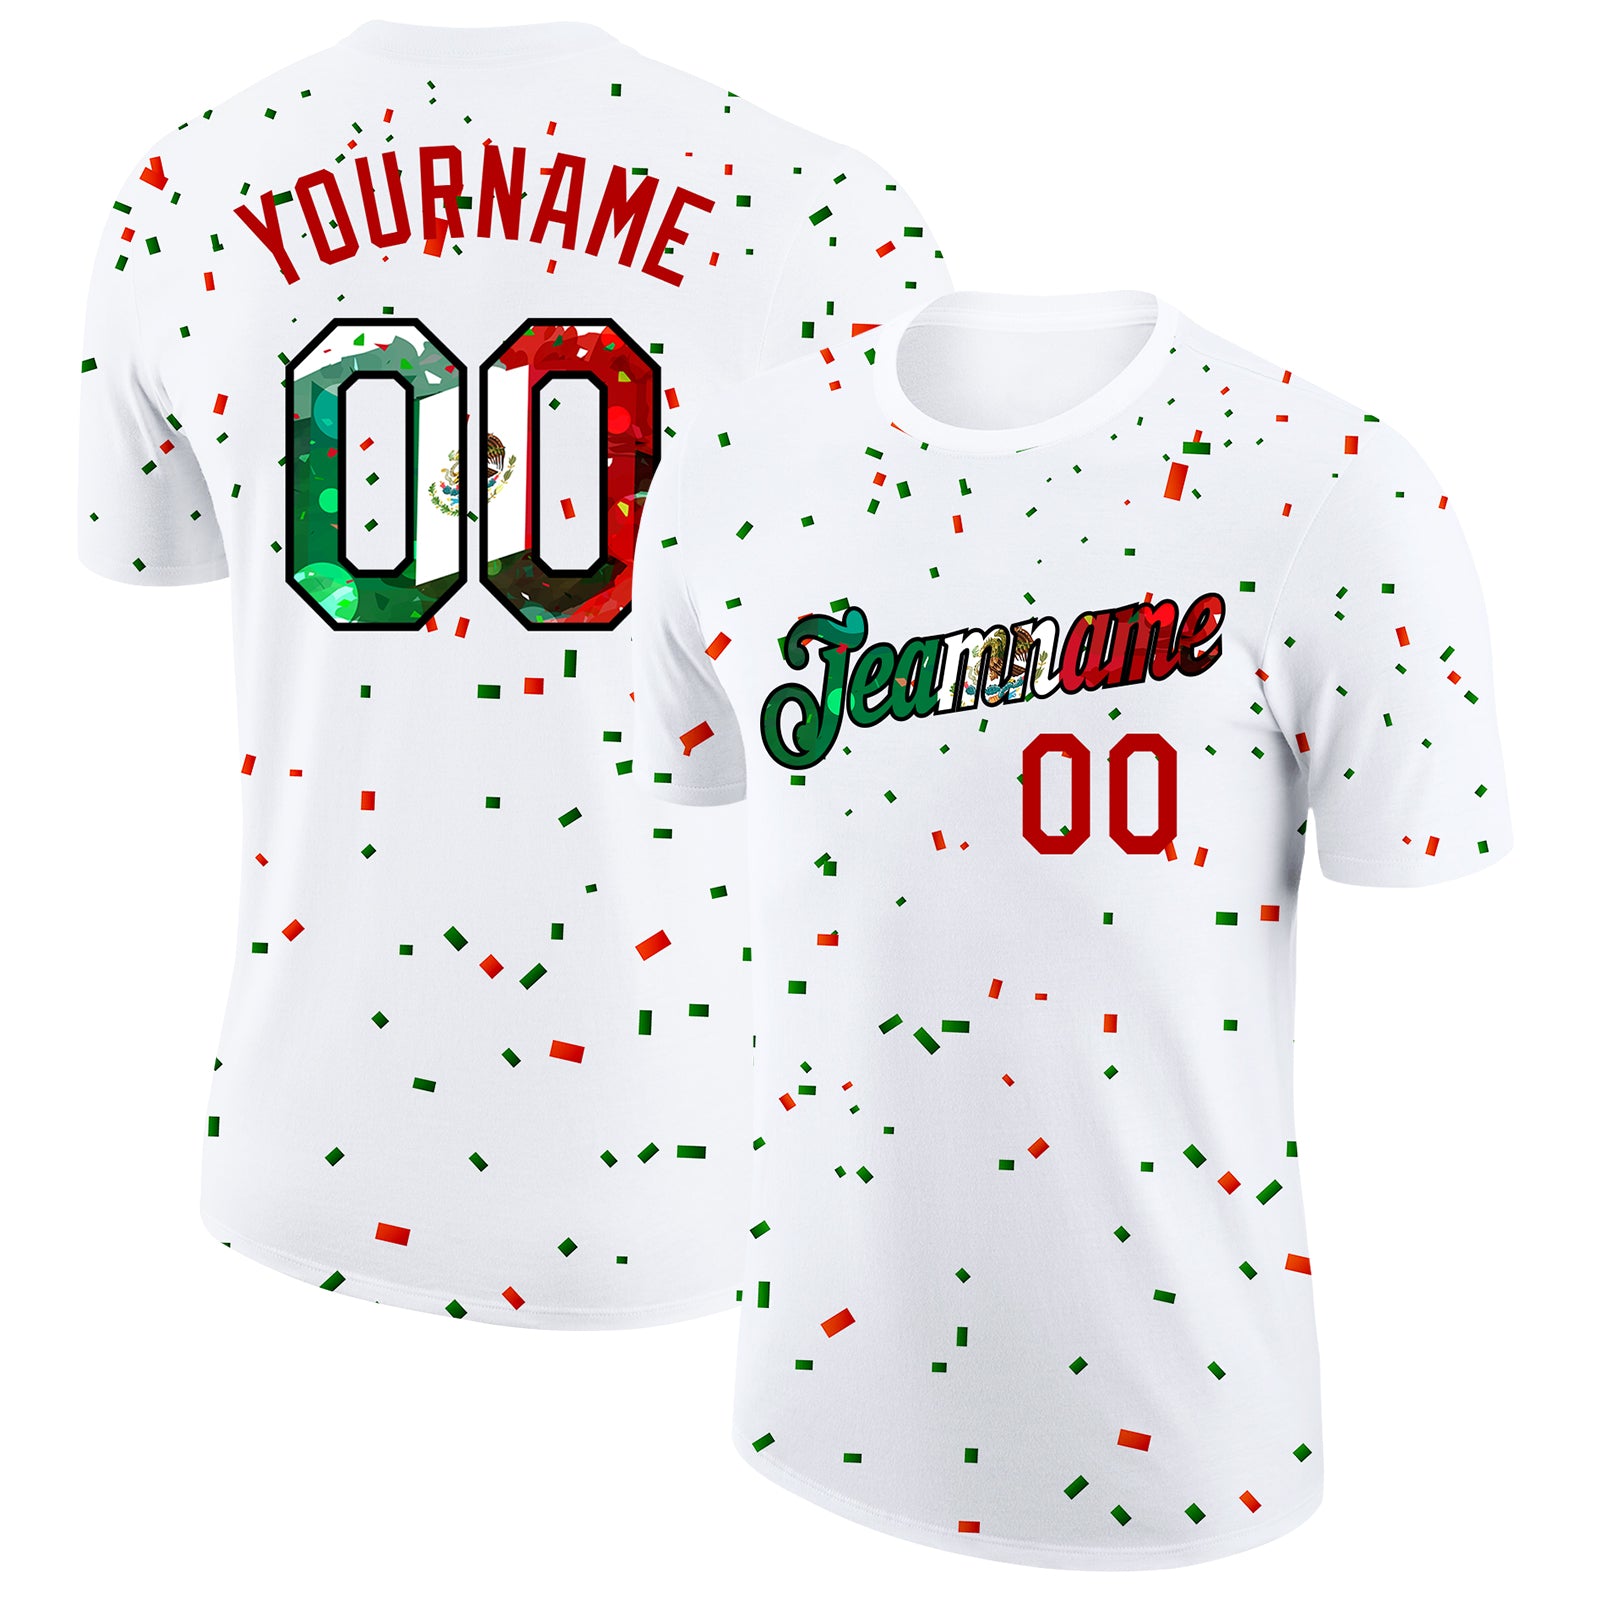 Custom Kelly Green White Red-Black Sublimation Mexican Flag Soccer Uniform  Jersey